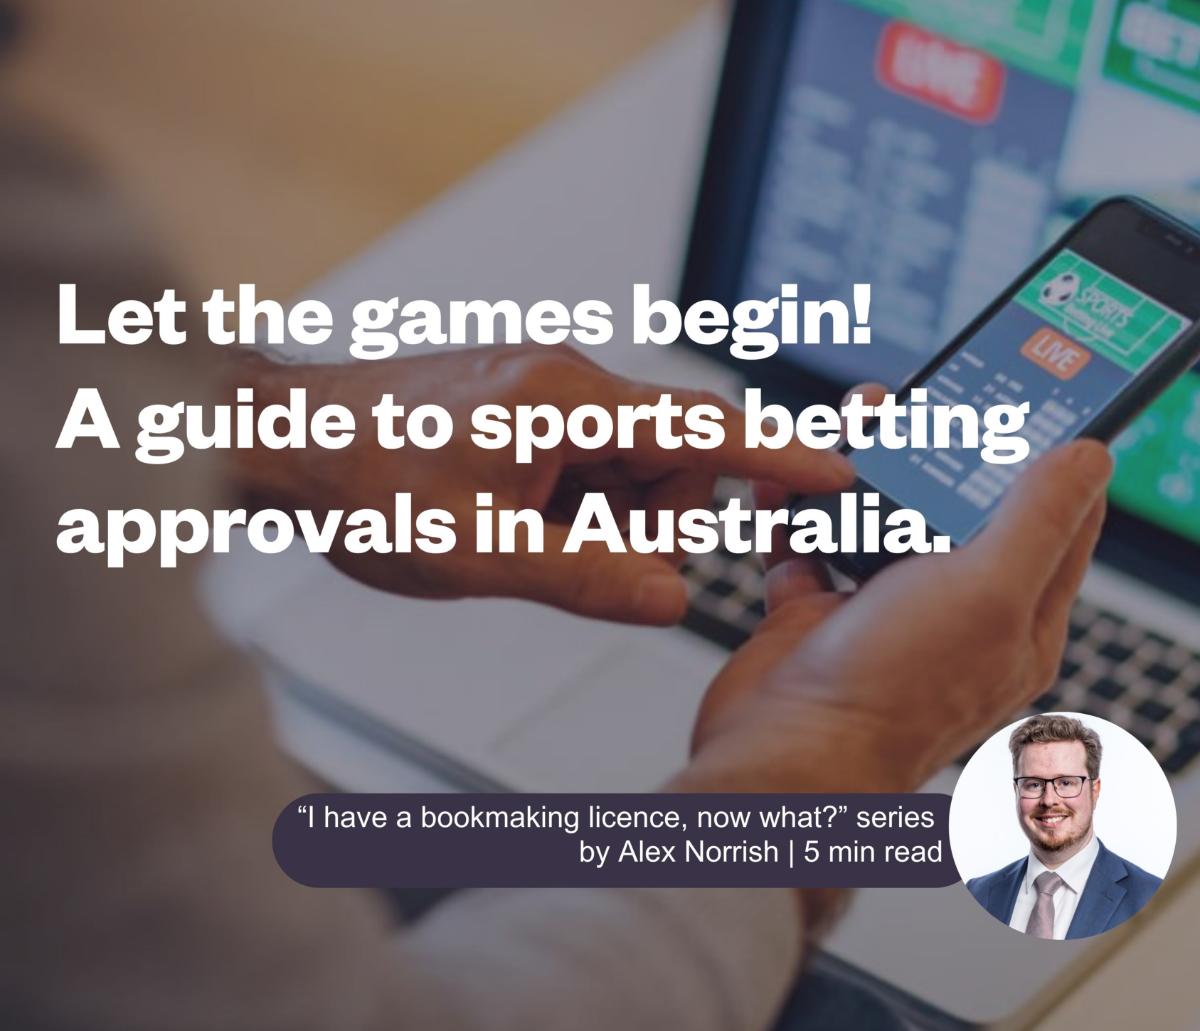  Let the games begin! … A guide to sports product fee and integrity approvals in Australia